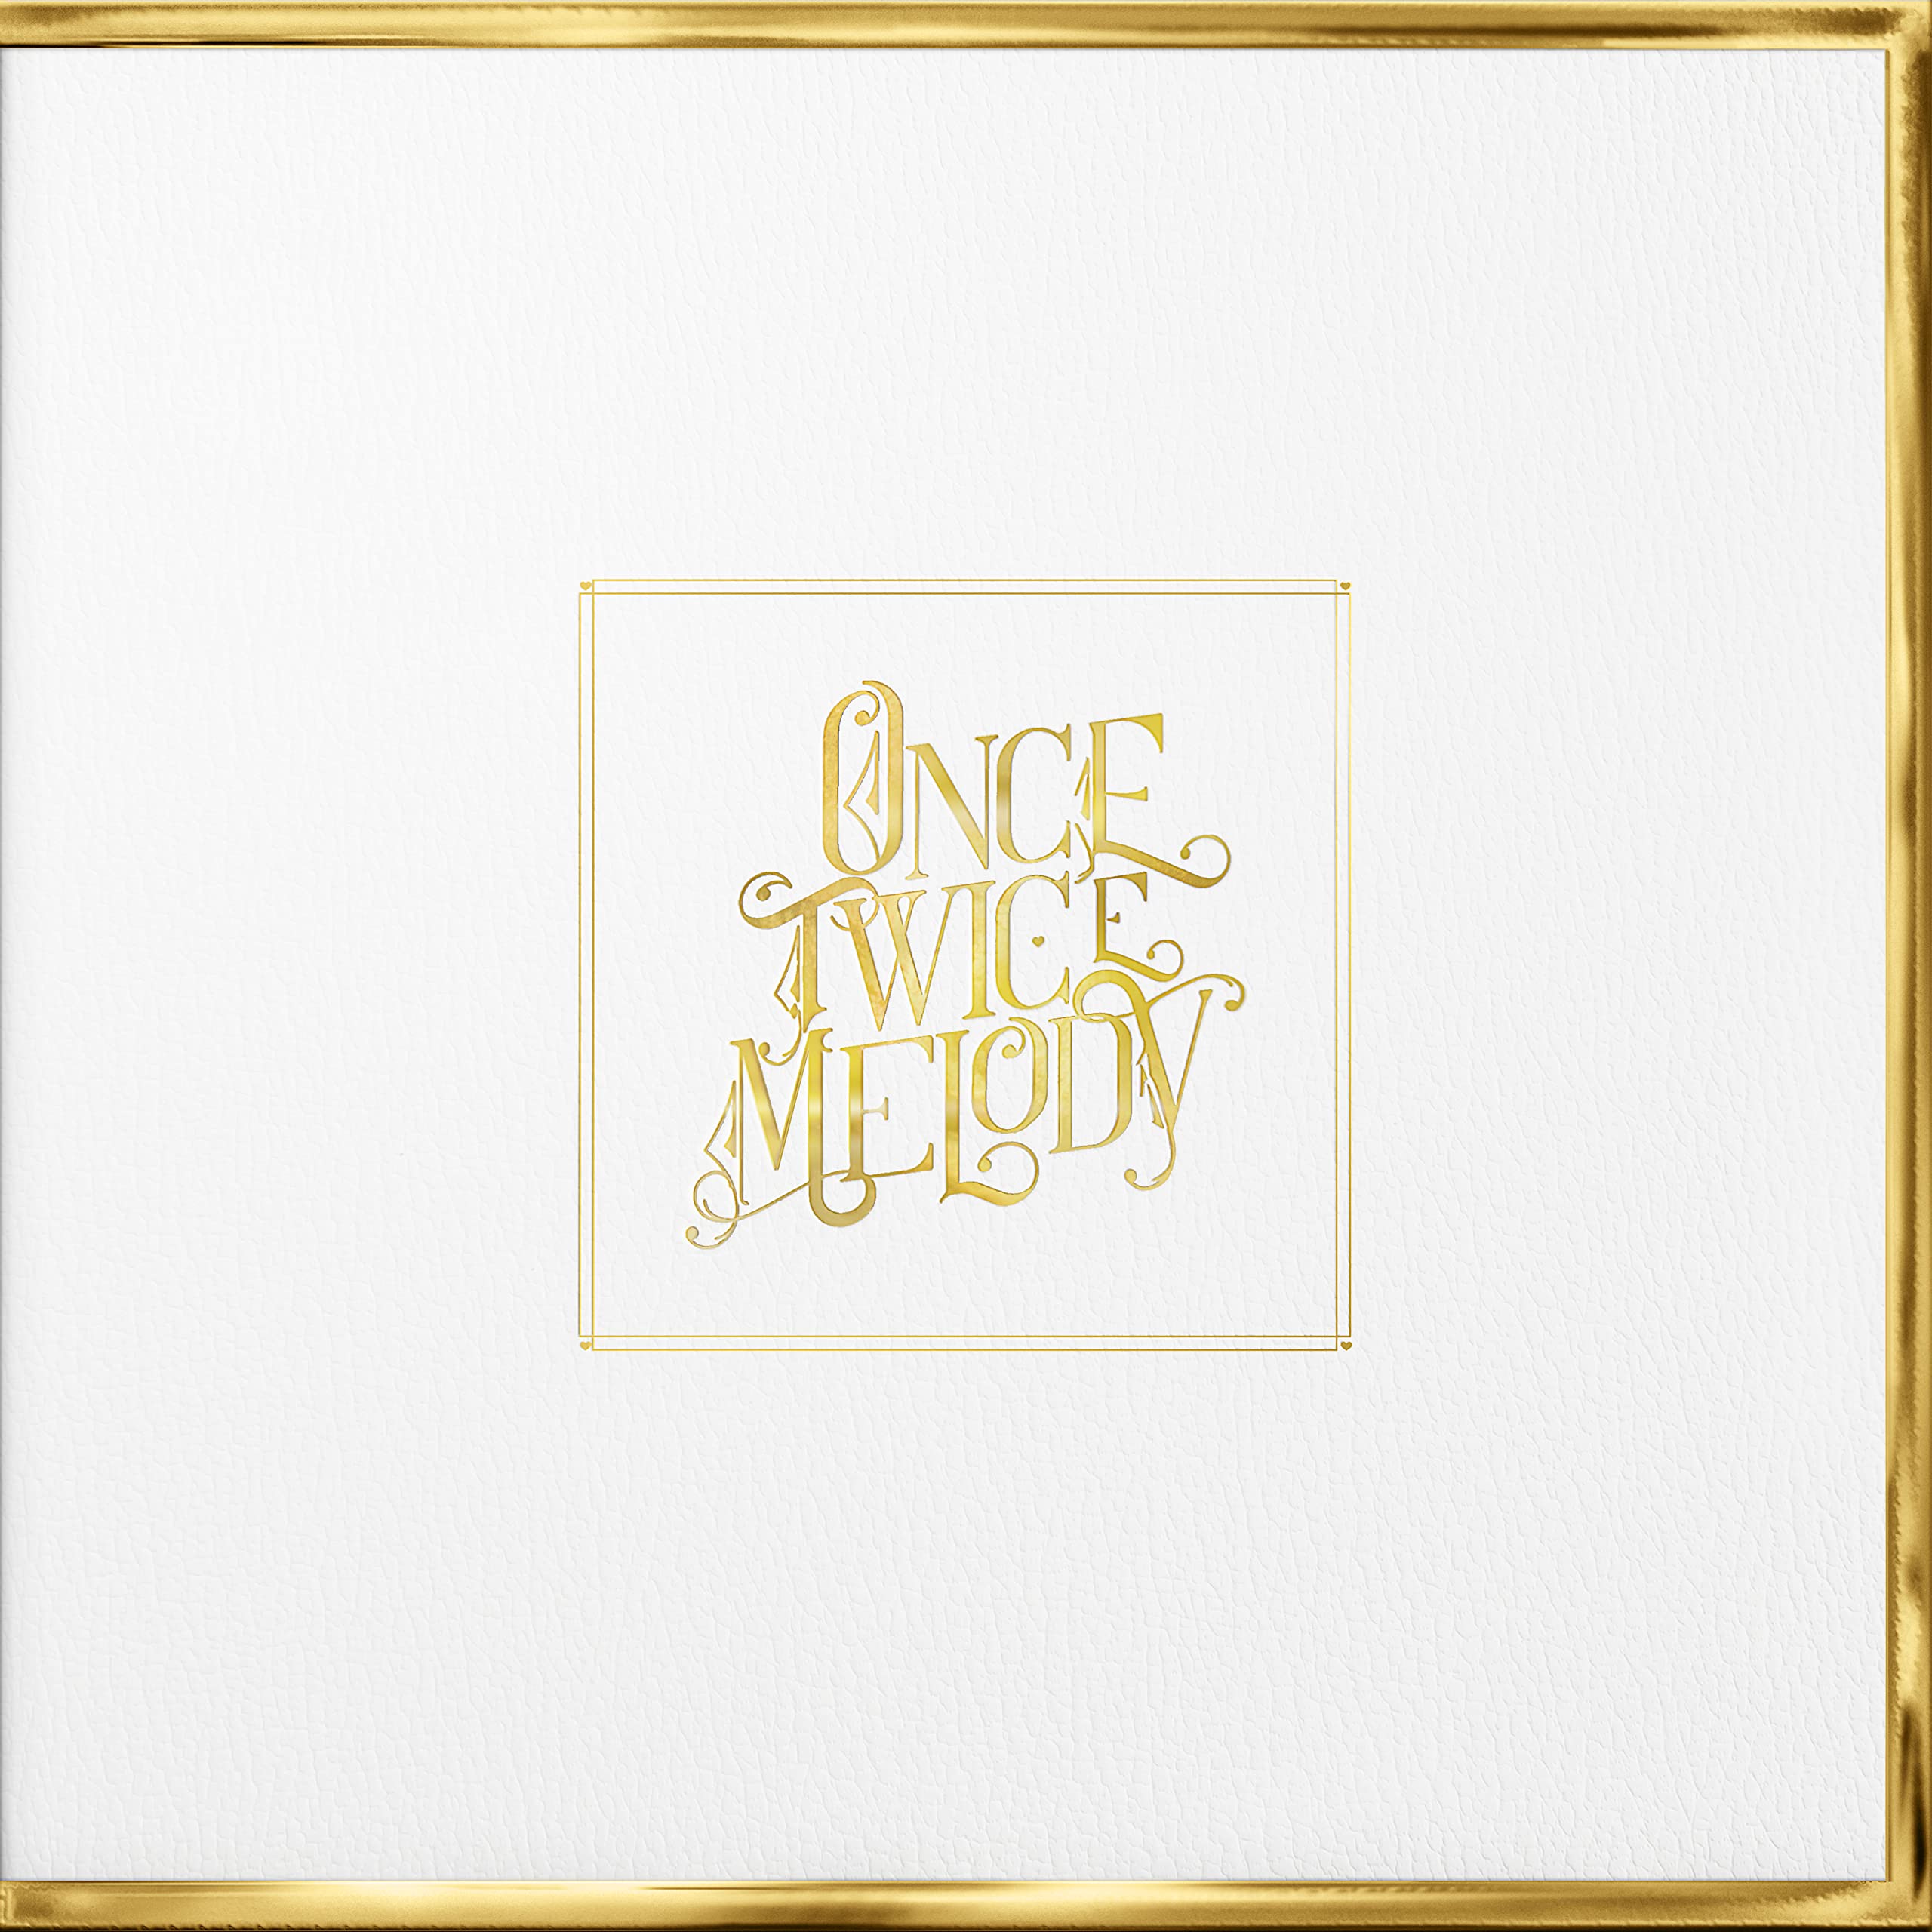 Beach House – Once Twice Melody Chapter 2 (2021) [FLAC 24bit, 48 kHz]